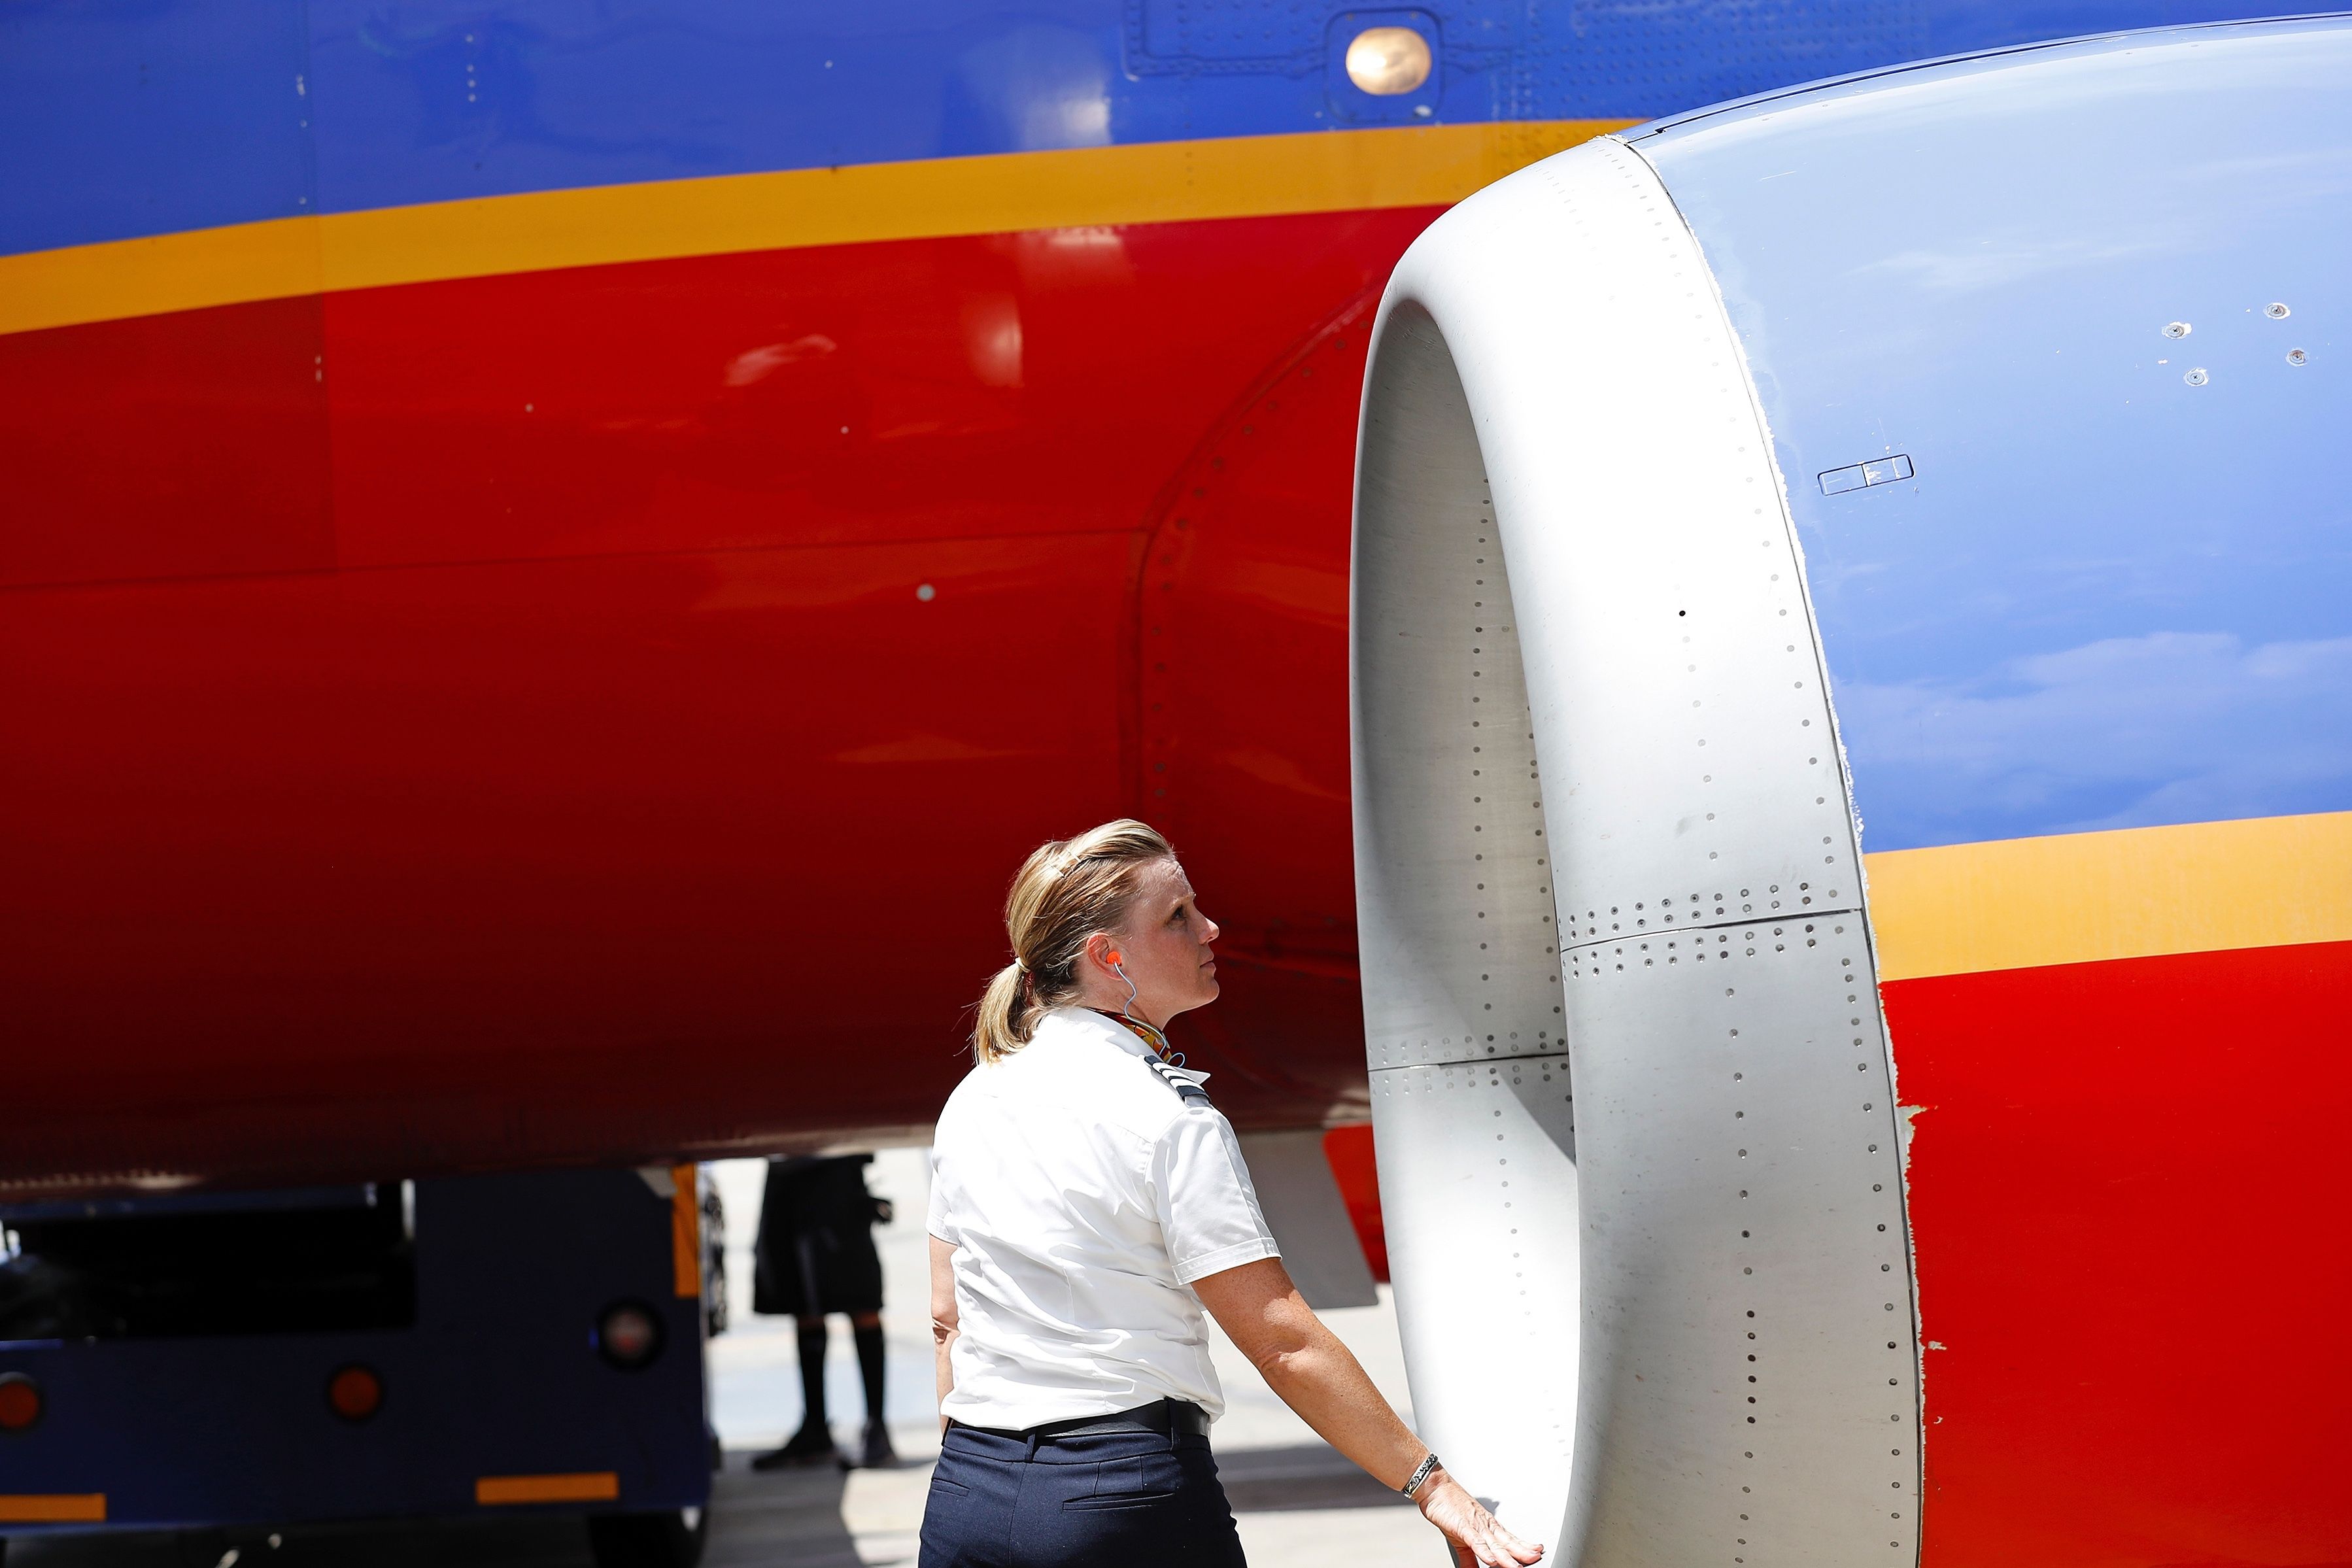 Woman in a flight crew uniform examines an engine on an aircraft with Southwest Airlines livery of red, yellow, and blue